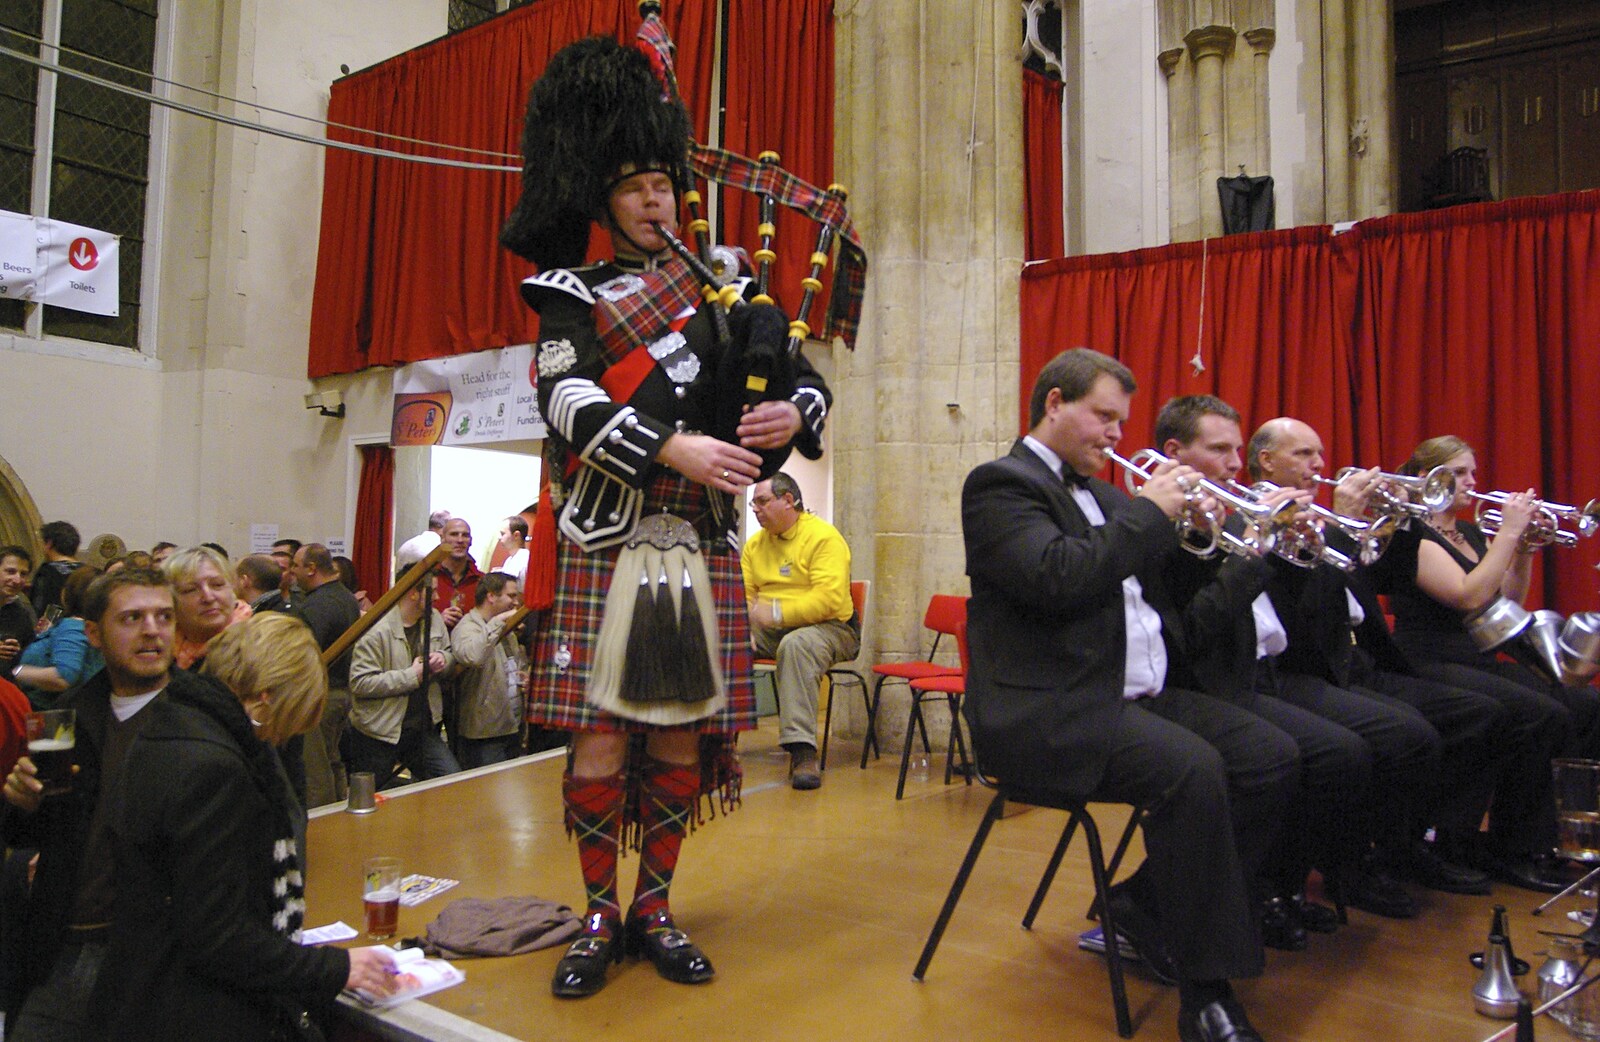 A piper joins the Cawston Silver Band on stage from The Brome Swan at the 30th Norwich Beer Festival, Norfolk - 24th October 2007